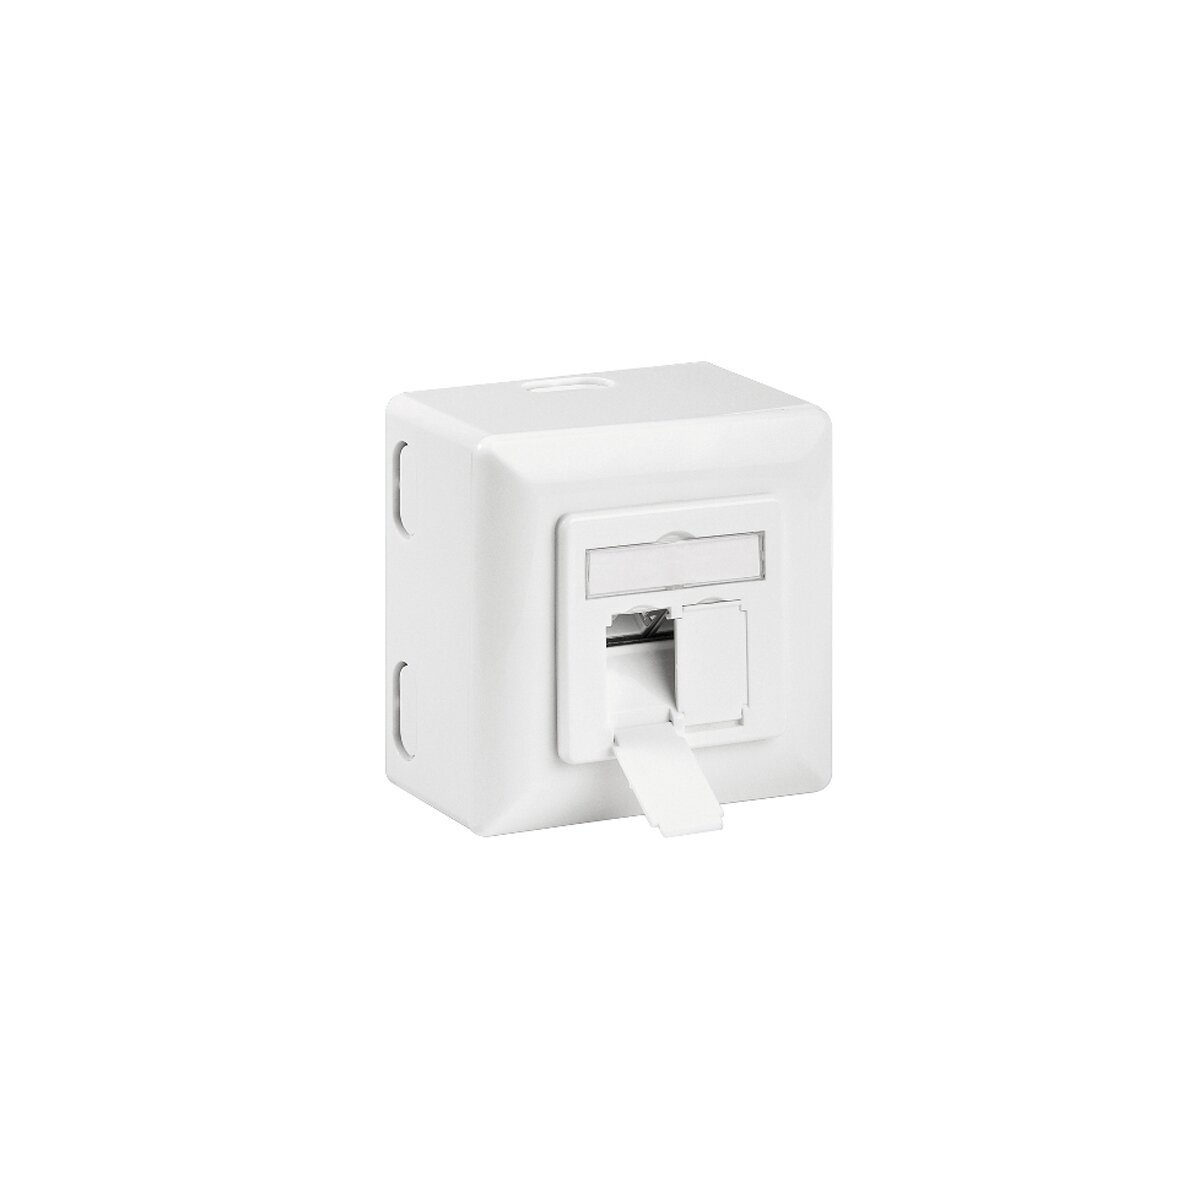 RJ45 Network Socket - Shielded Surface Mounted Double Wall Socket with  CAT6A Ethernet LAN Cable Port for Network Cable